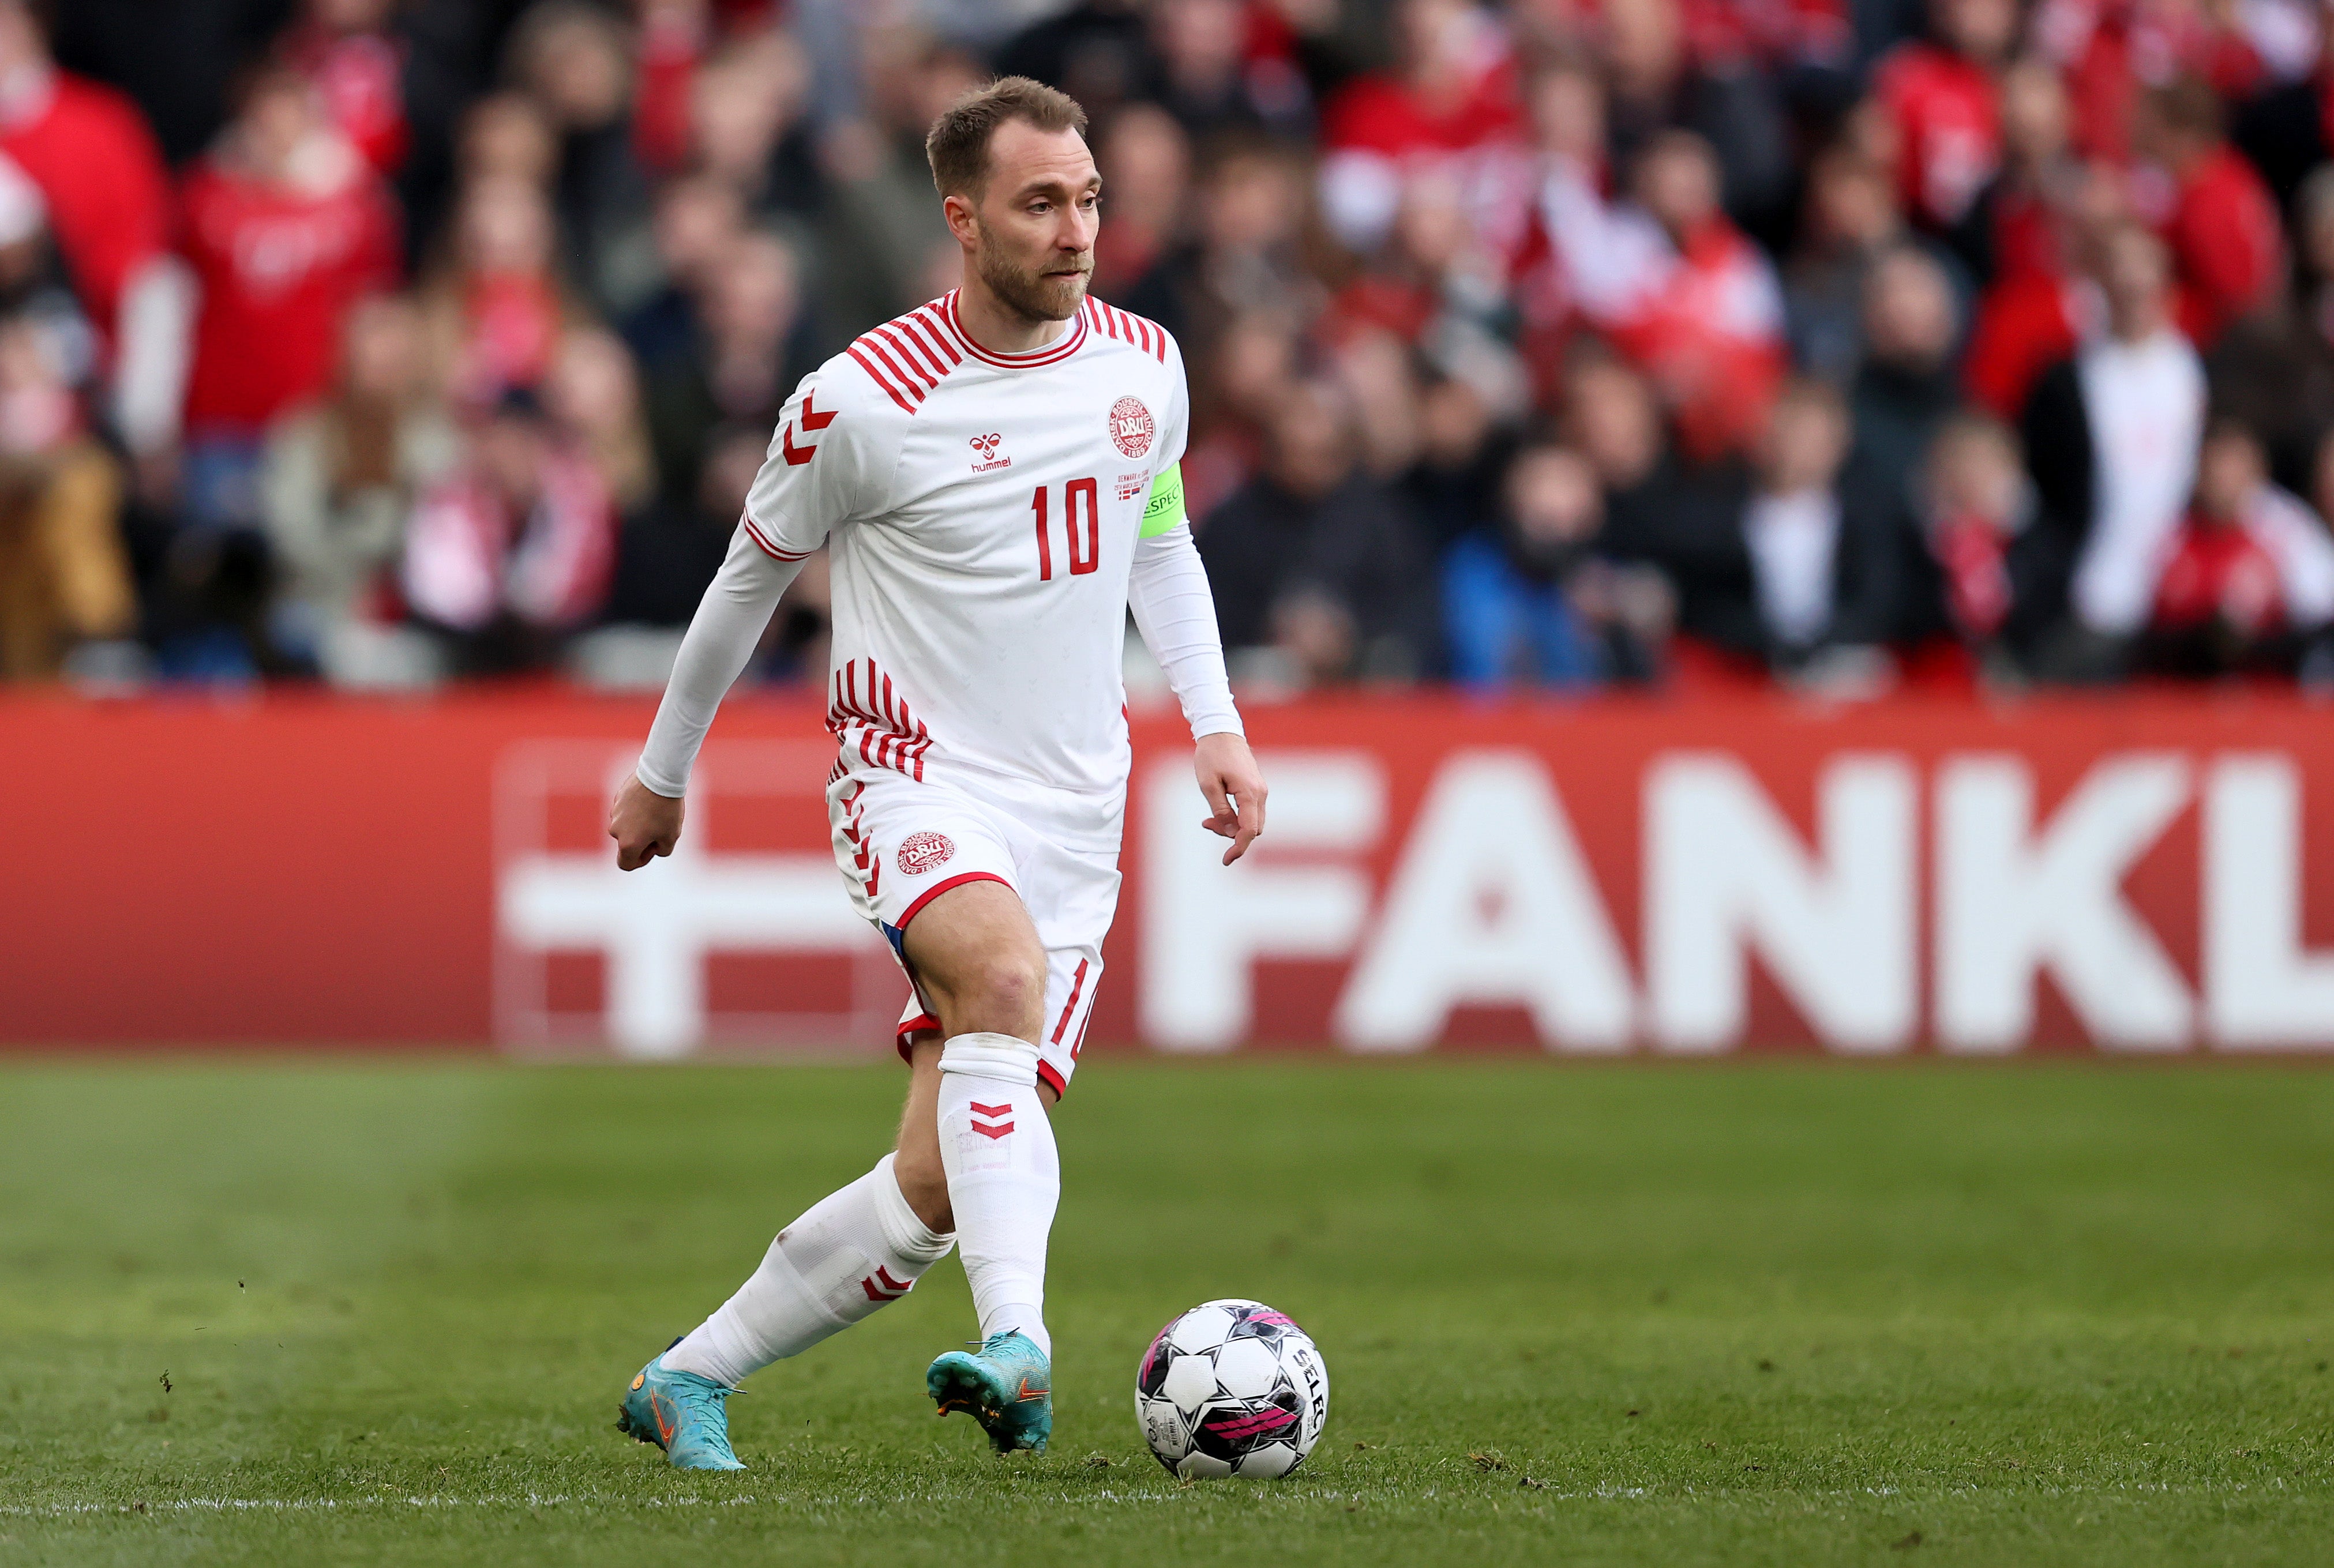 Christian Eriksen is returning to the world stage after his near-fatal heart attack